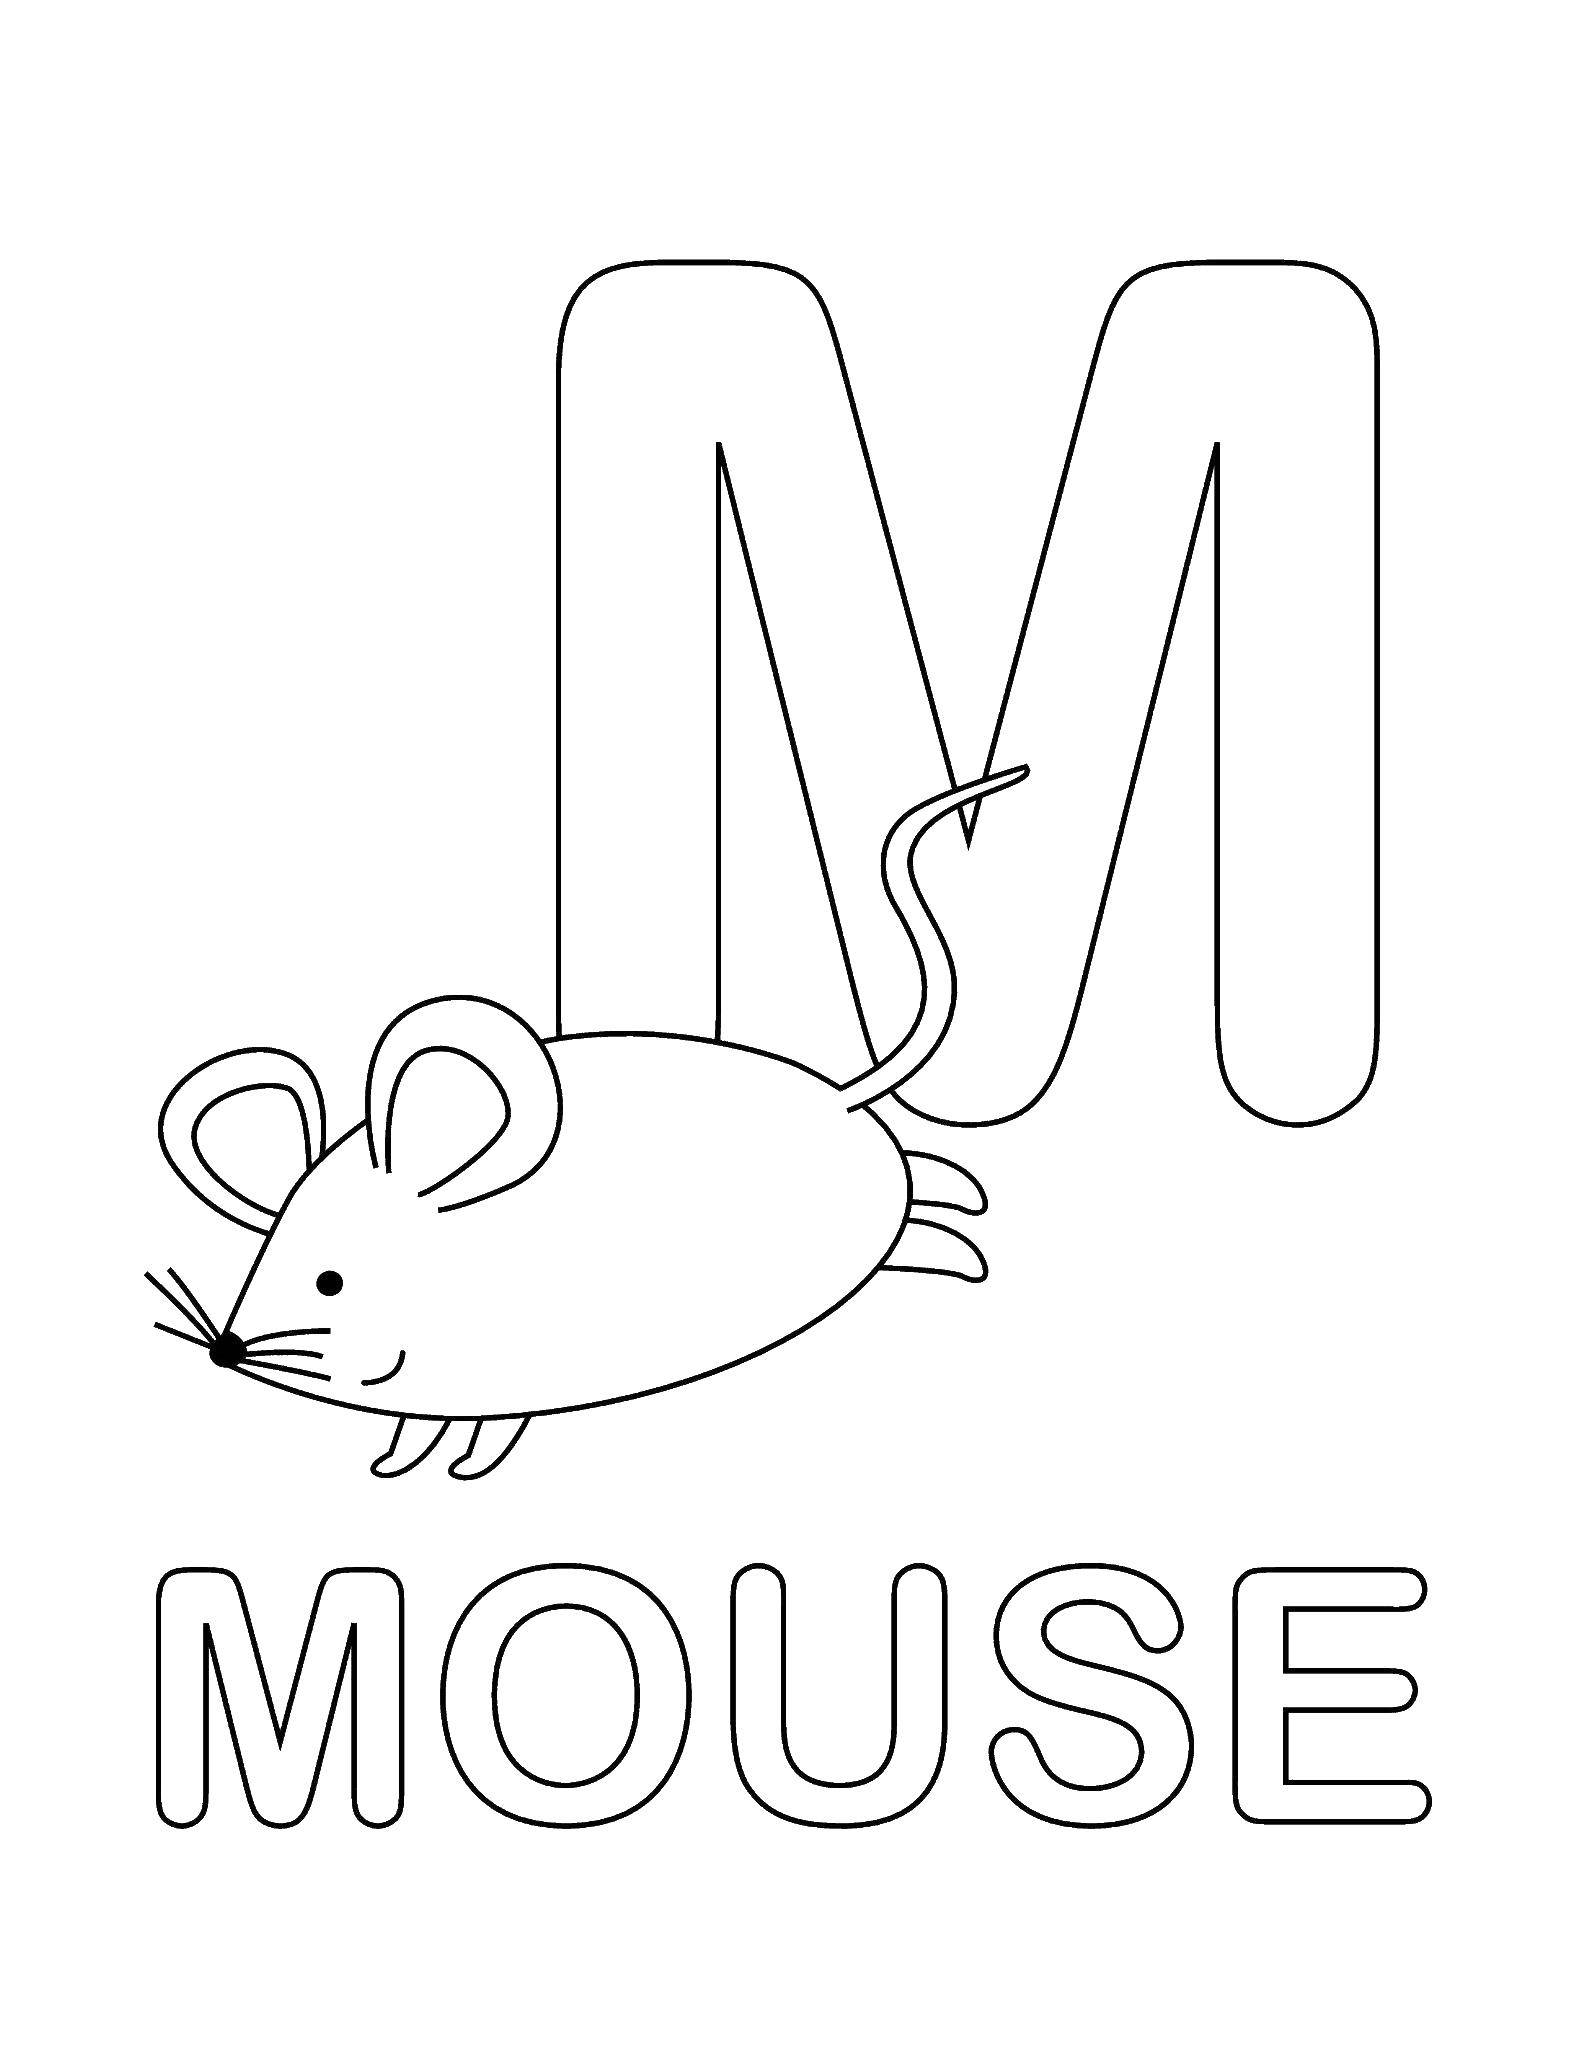 Coloring M mouse. Category English words. Tags:  English.